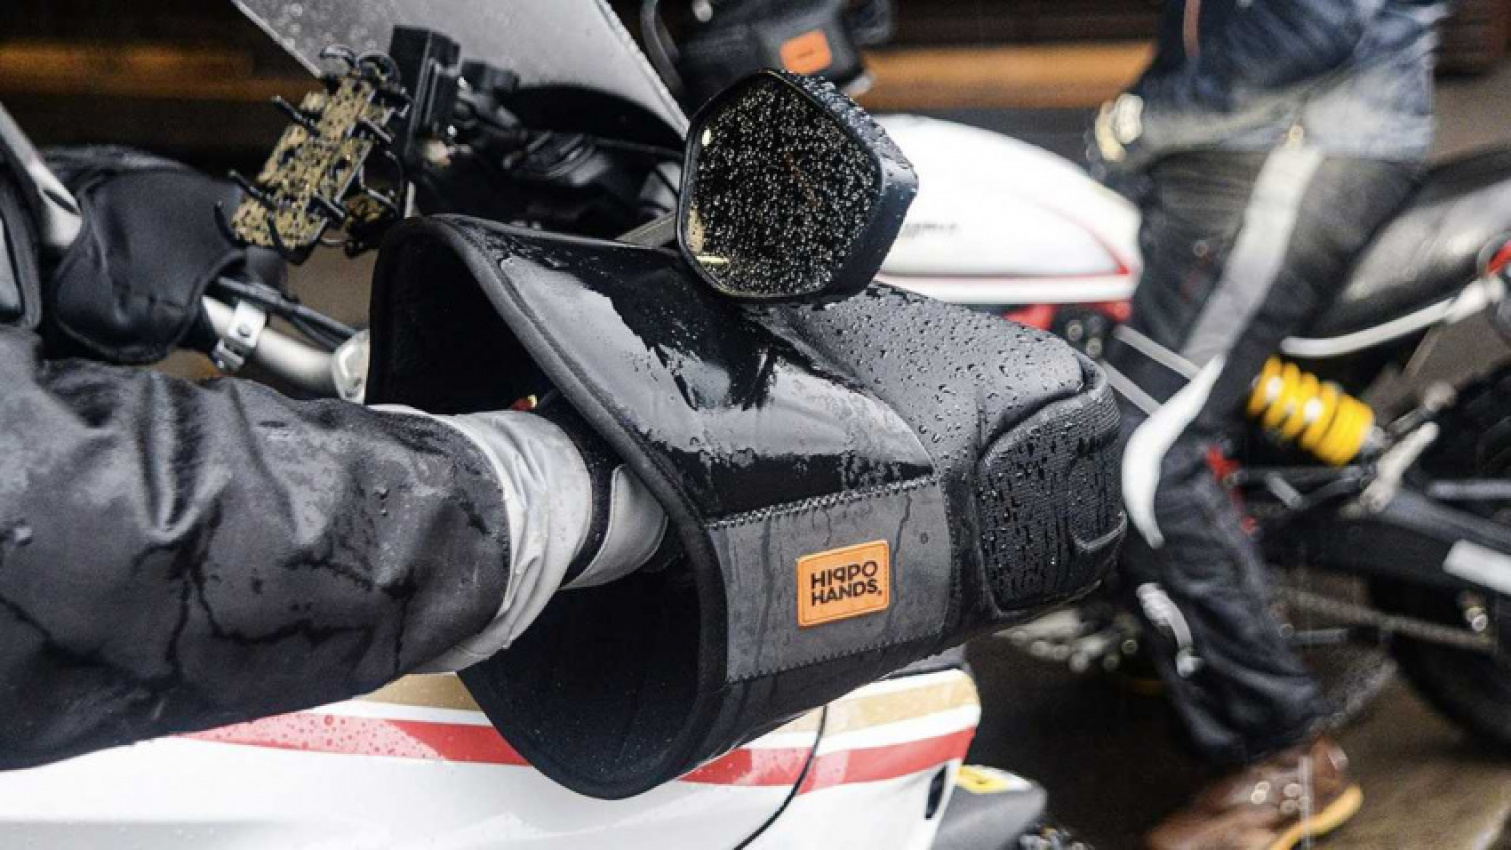 autos, cars, gear, are hippo hands covers the secret to winter riding? let’s find out!